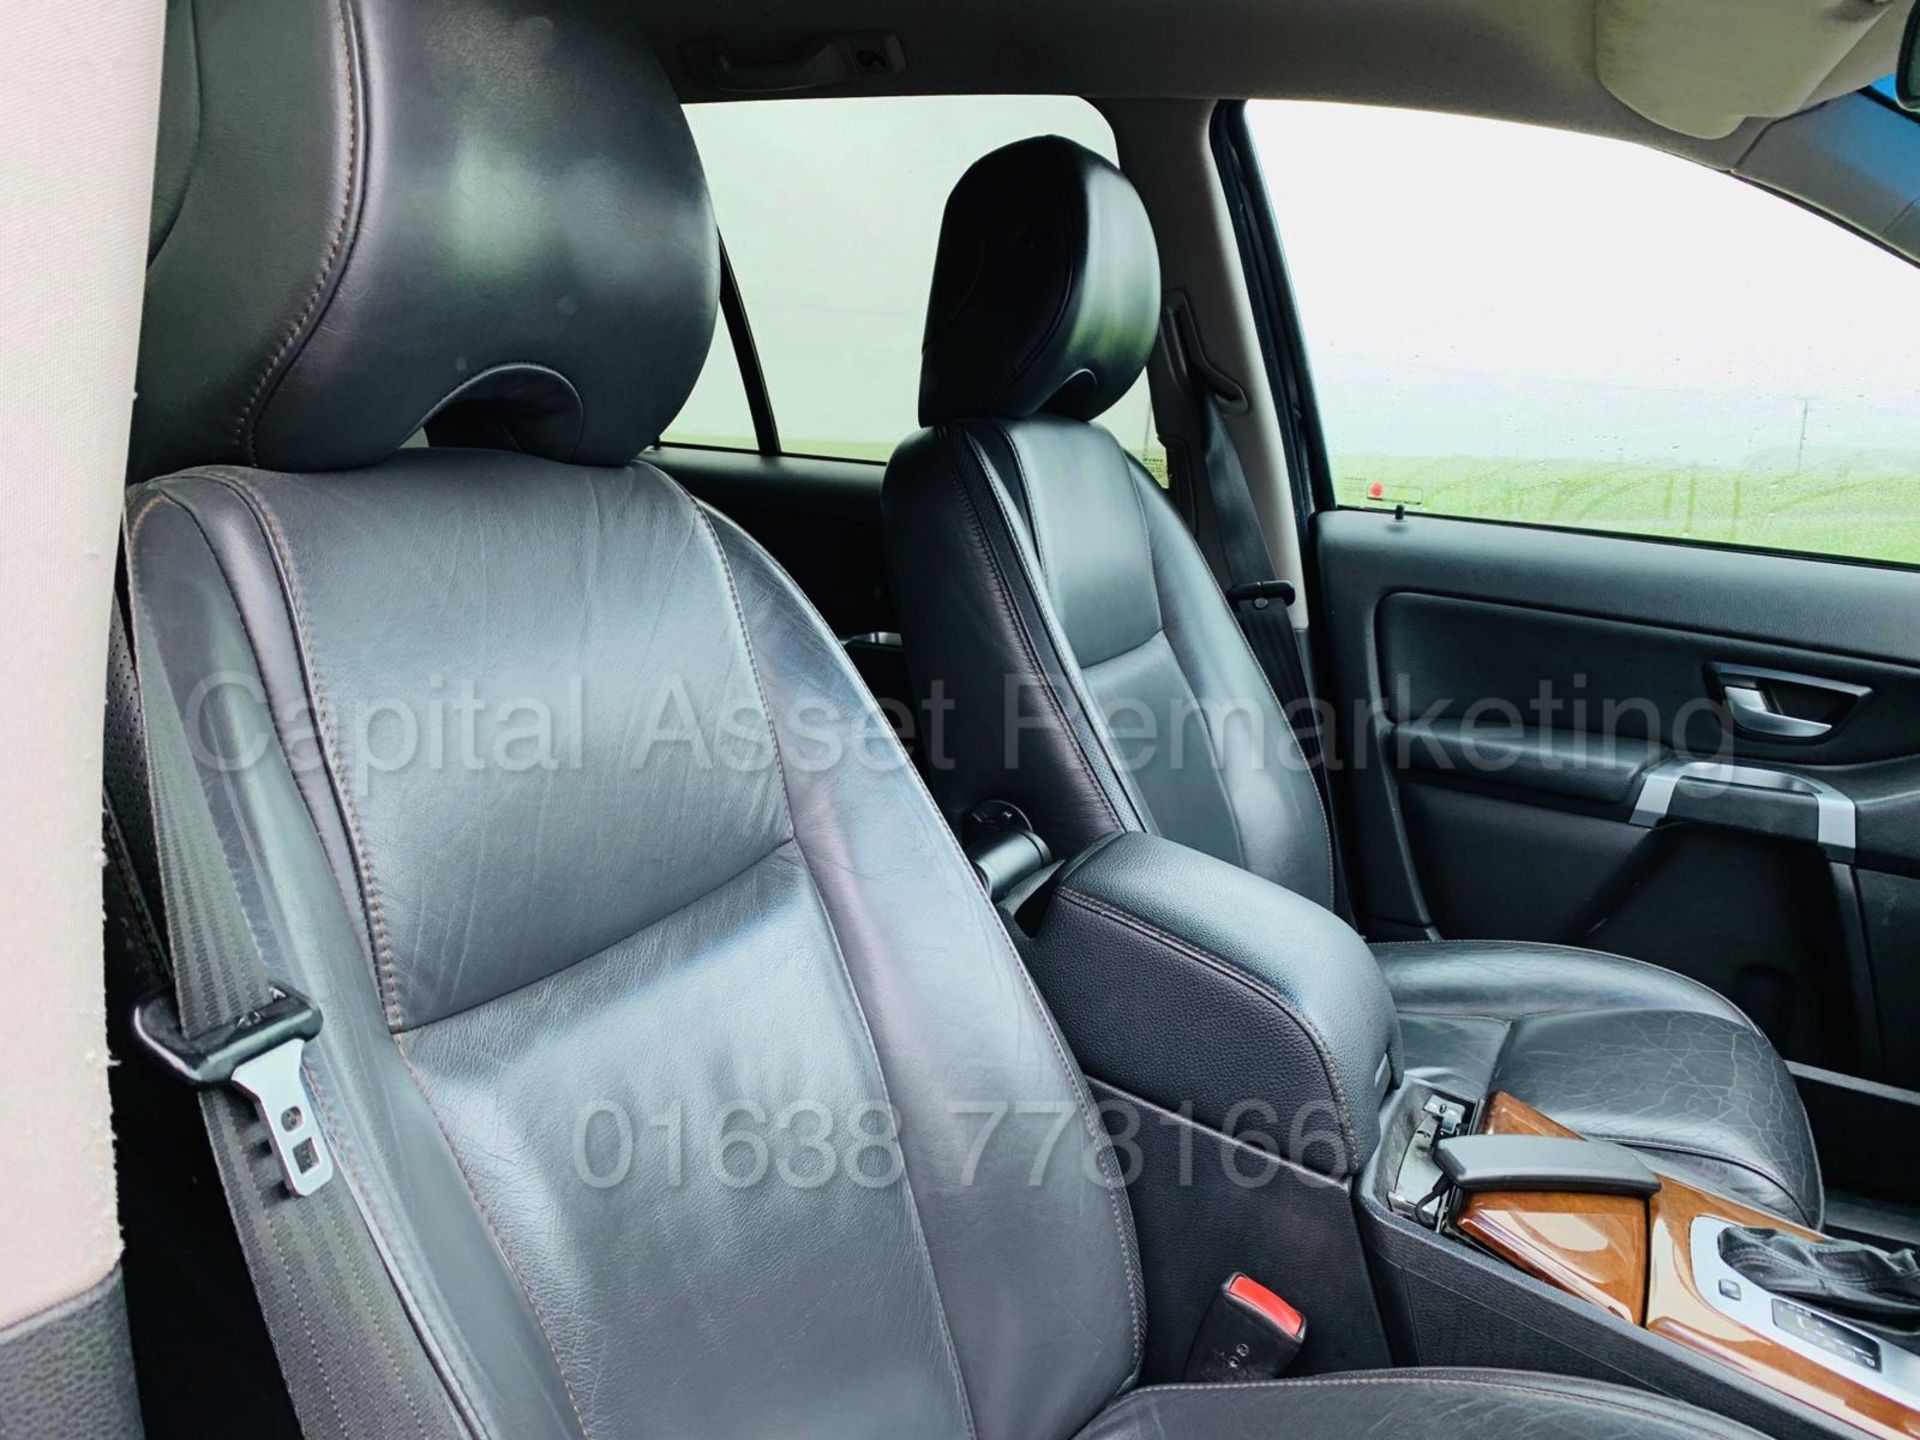 VOLVO XC90 *SE LUX - EDITION* 7 SEATER SUV (2007 MODEL) '2.4 DIESEL - 185 BHP - AUTO' *FULLY LOADED* - Image 16 of 37